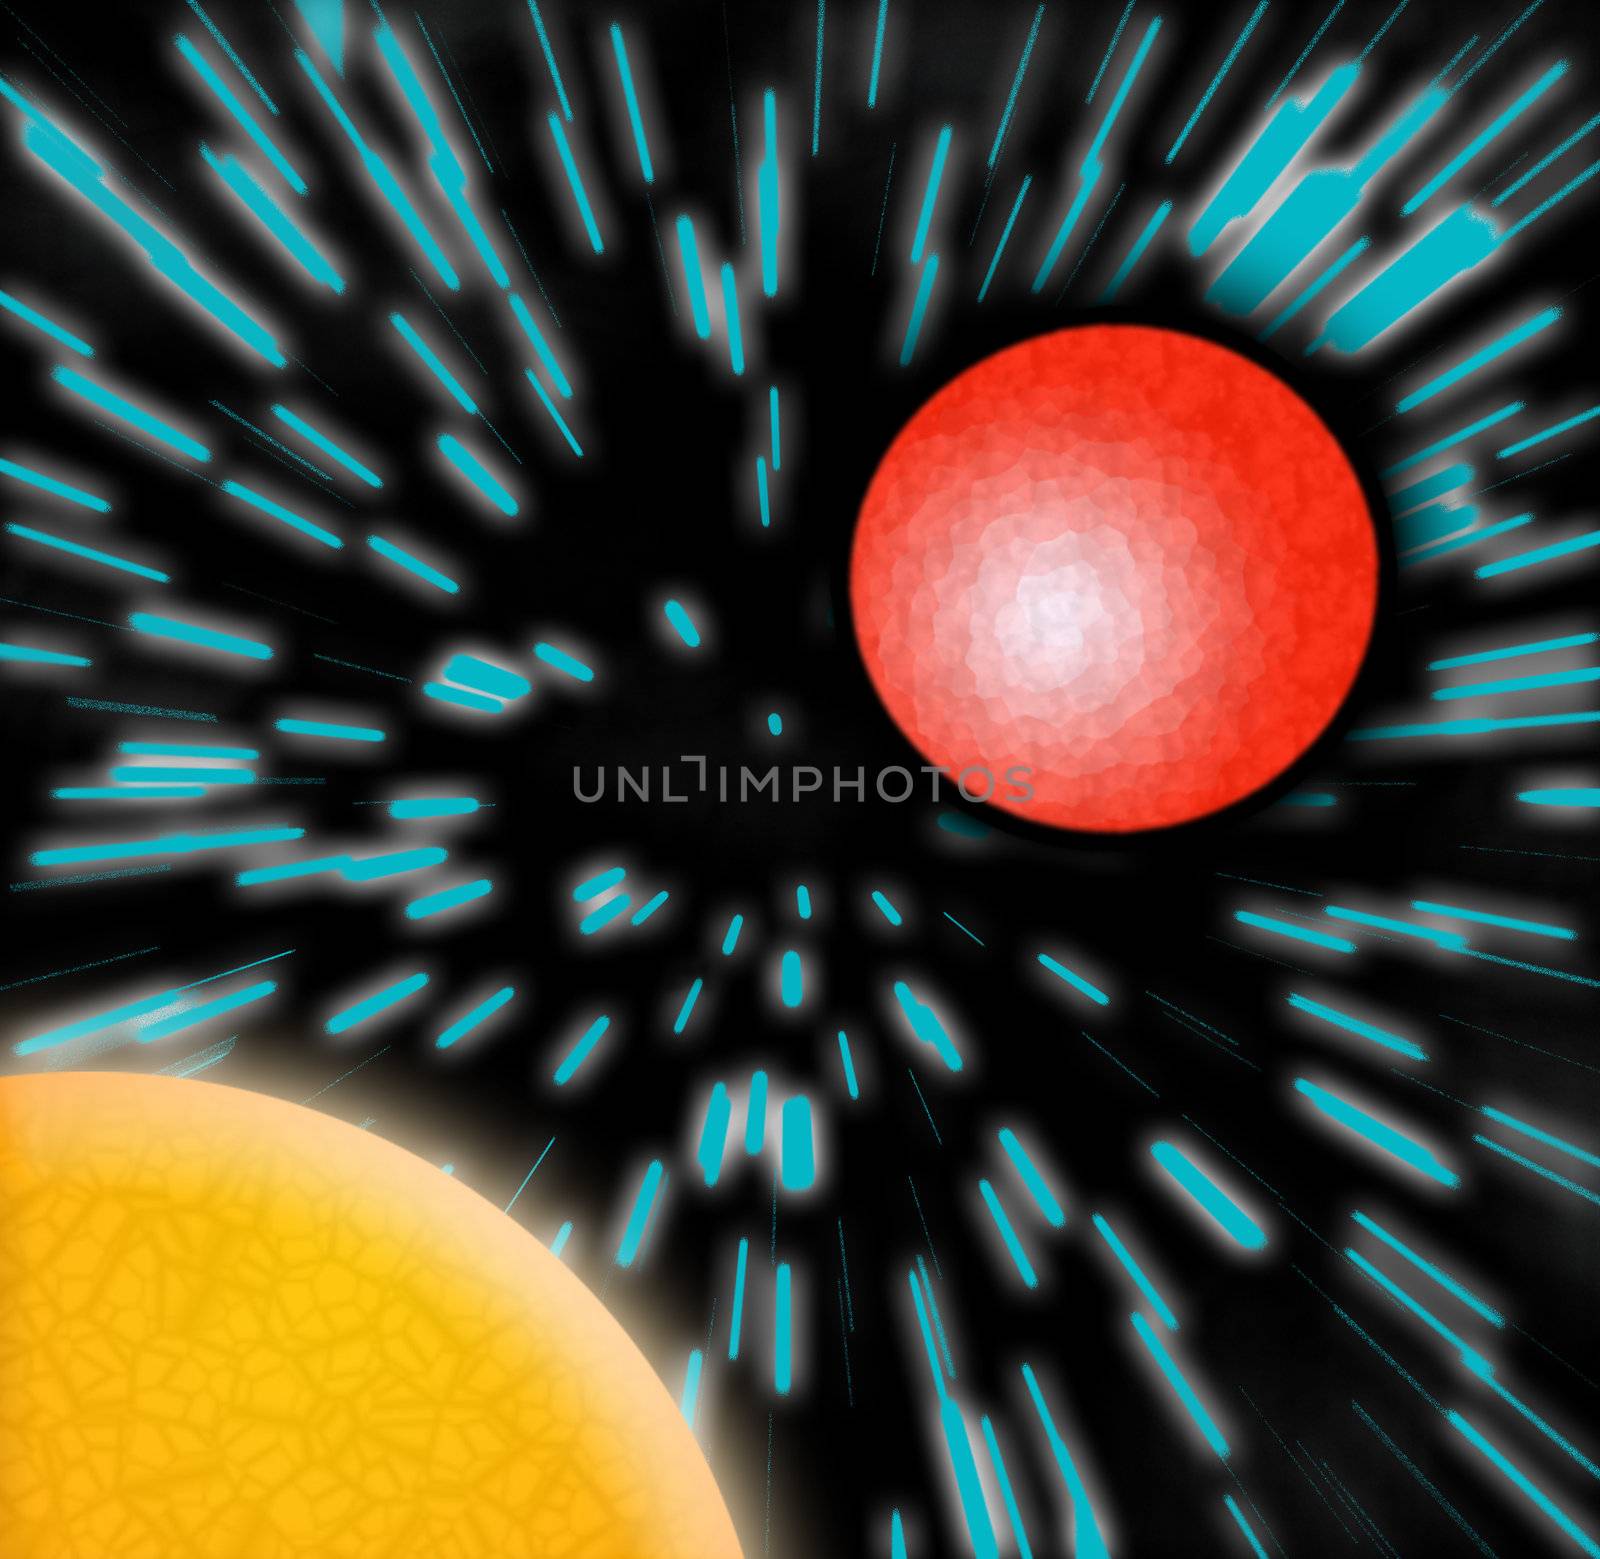 Sun and a red planet - the stars show zooming movement, like you're ducking and dodging the planets.